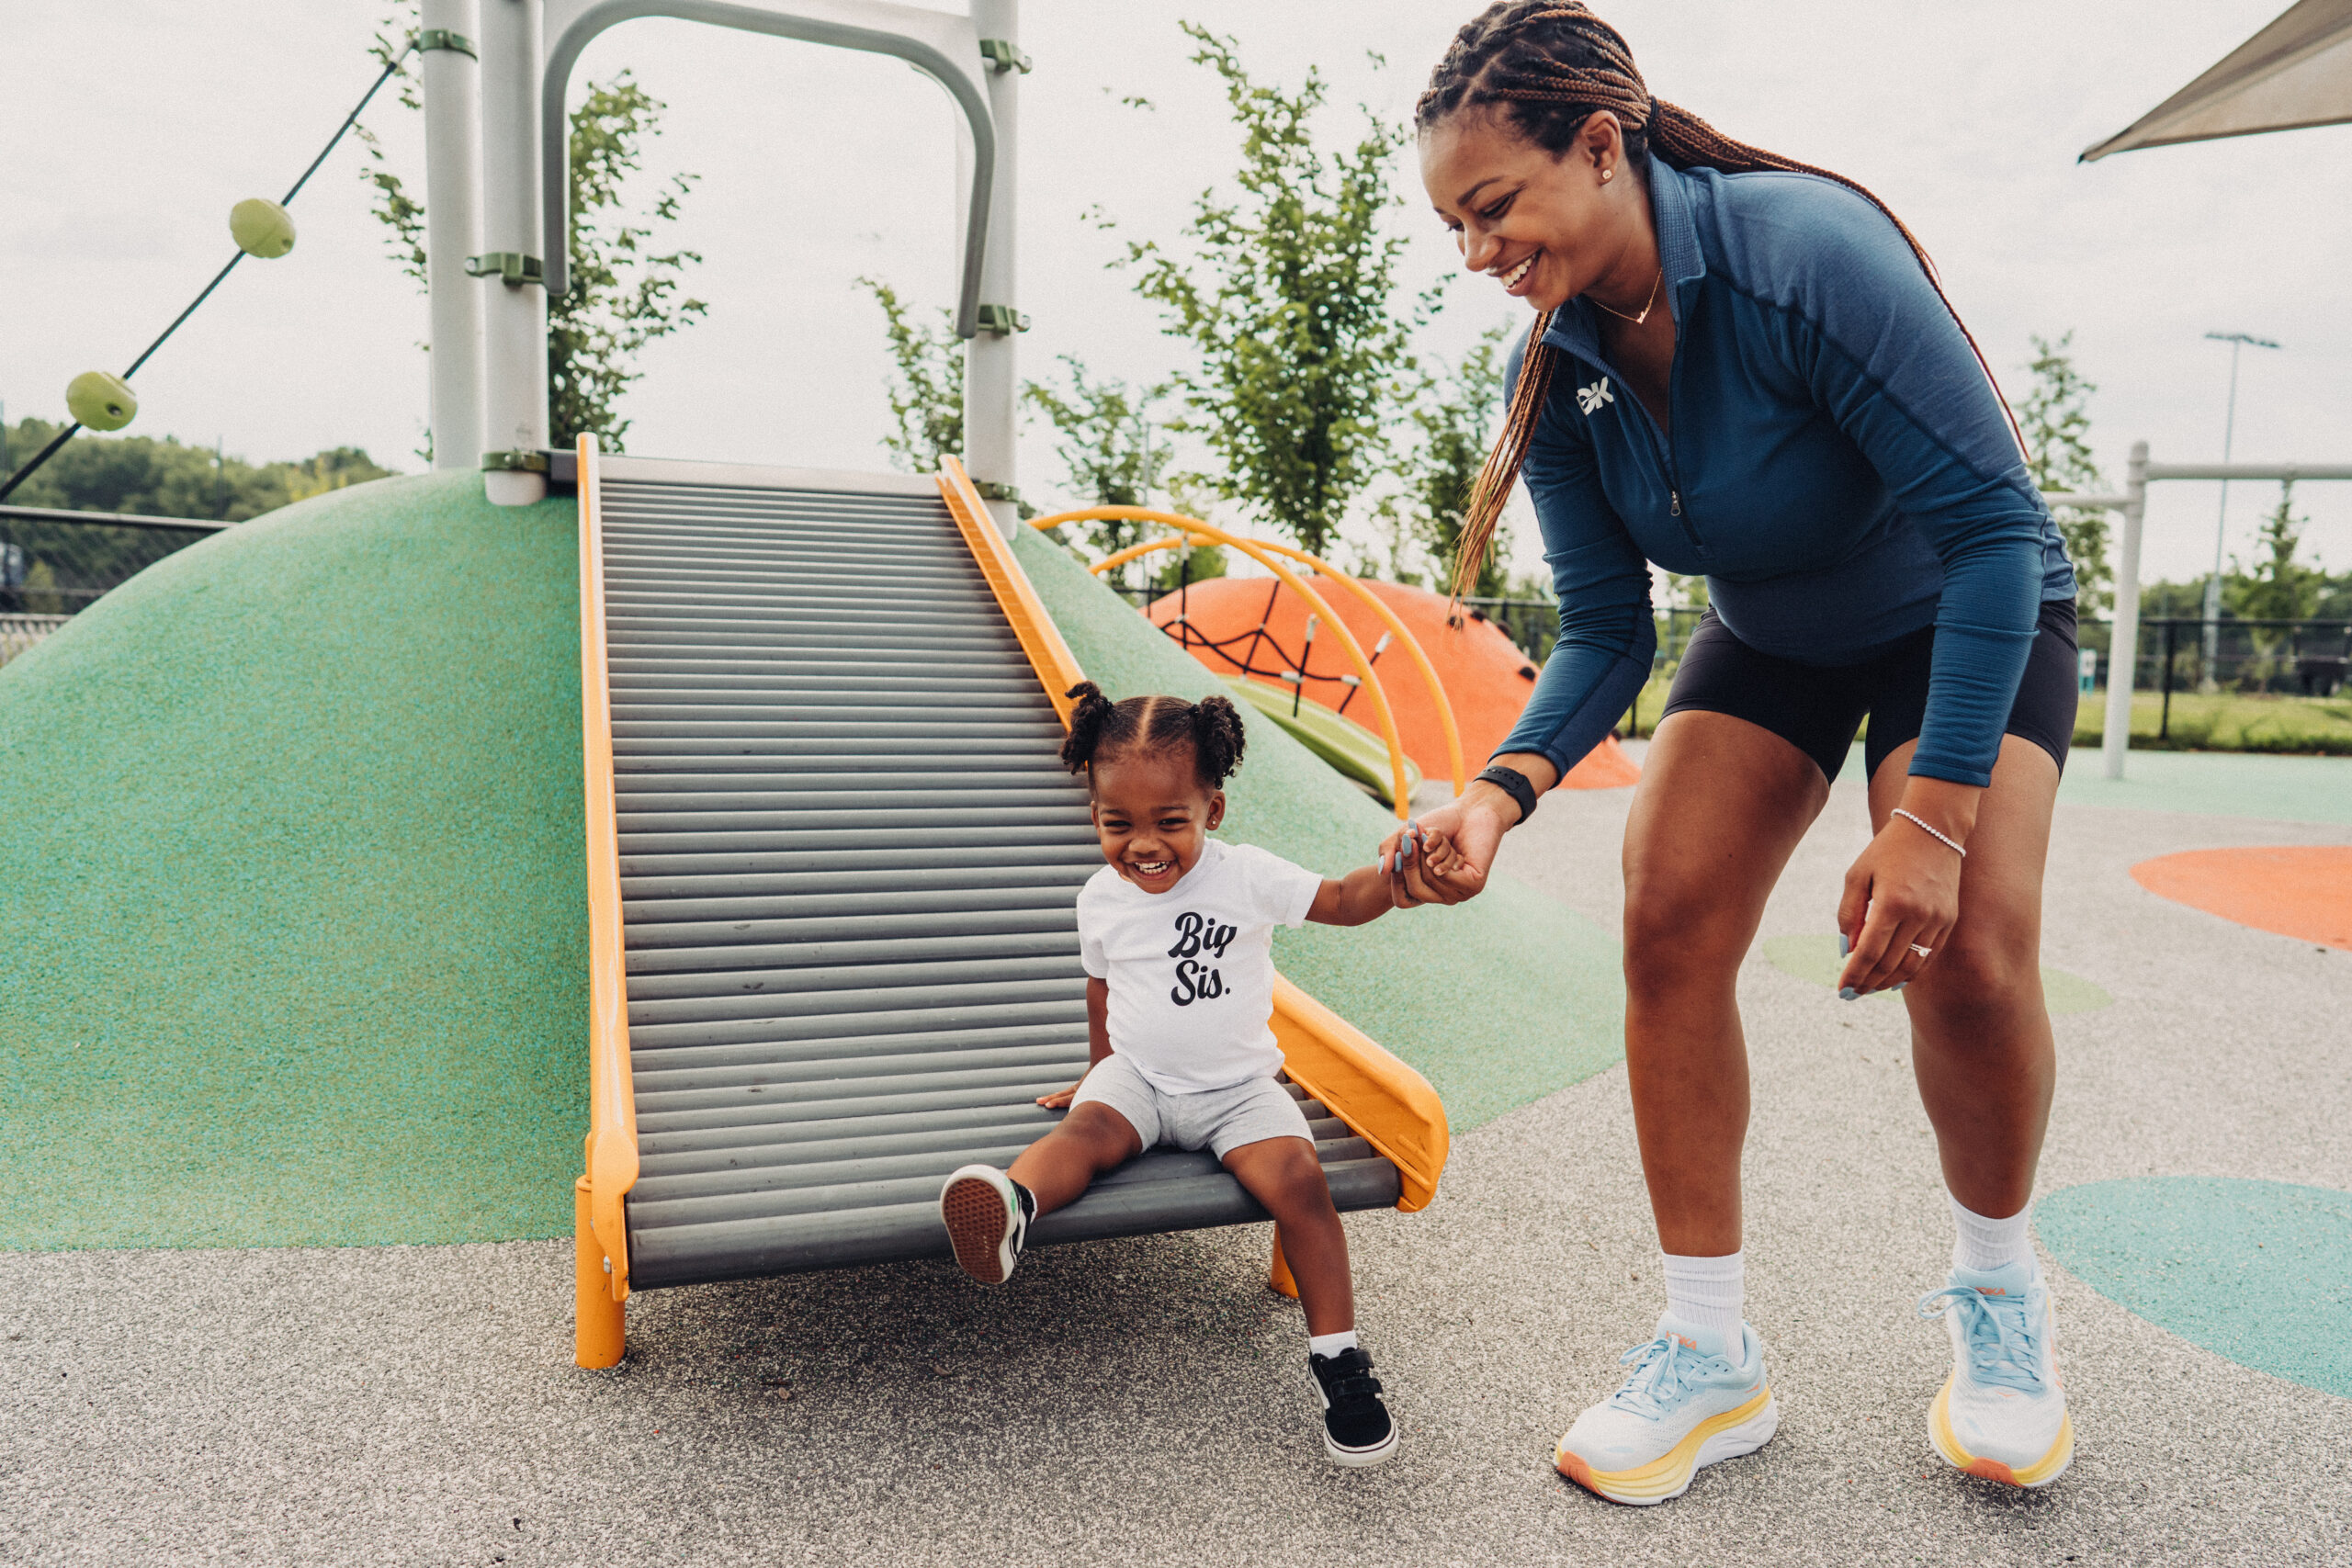 Ashlee Greene helps her daughter down a slide in a park. Ashlee is wearing a blue/grey athletic top, black shorts, and white shoes. Her daughter is dressed in a white outfit.